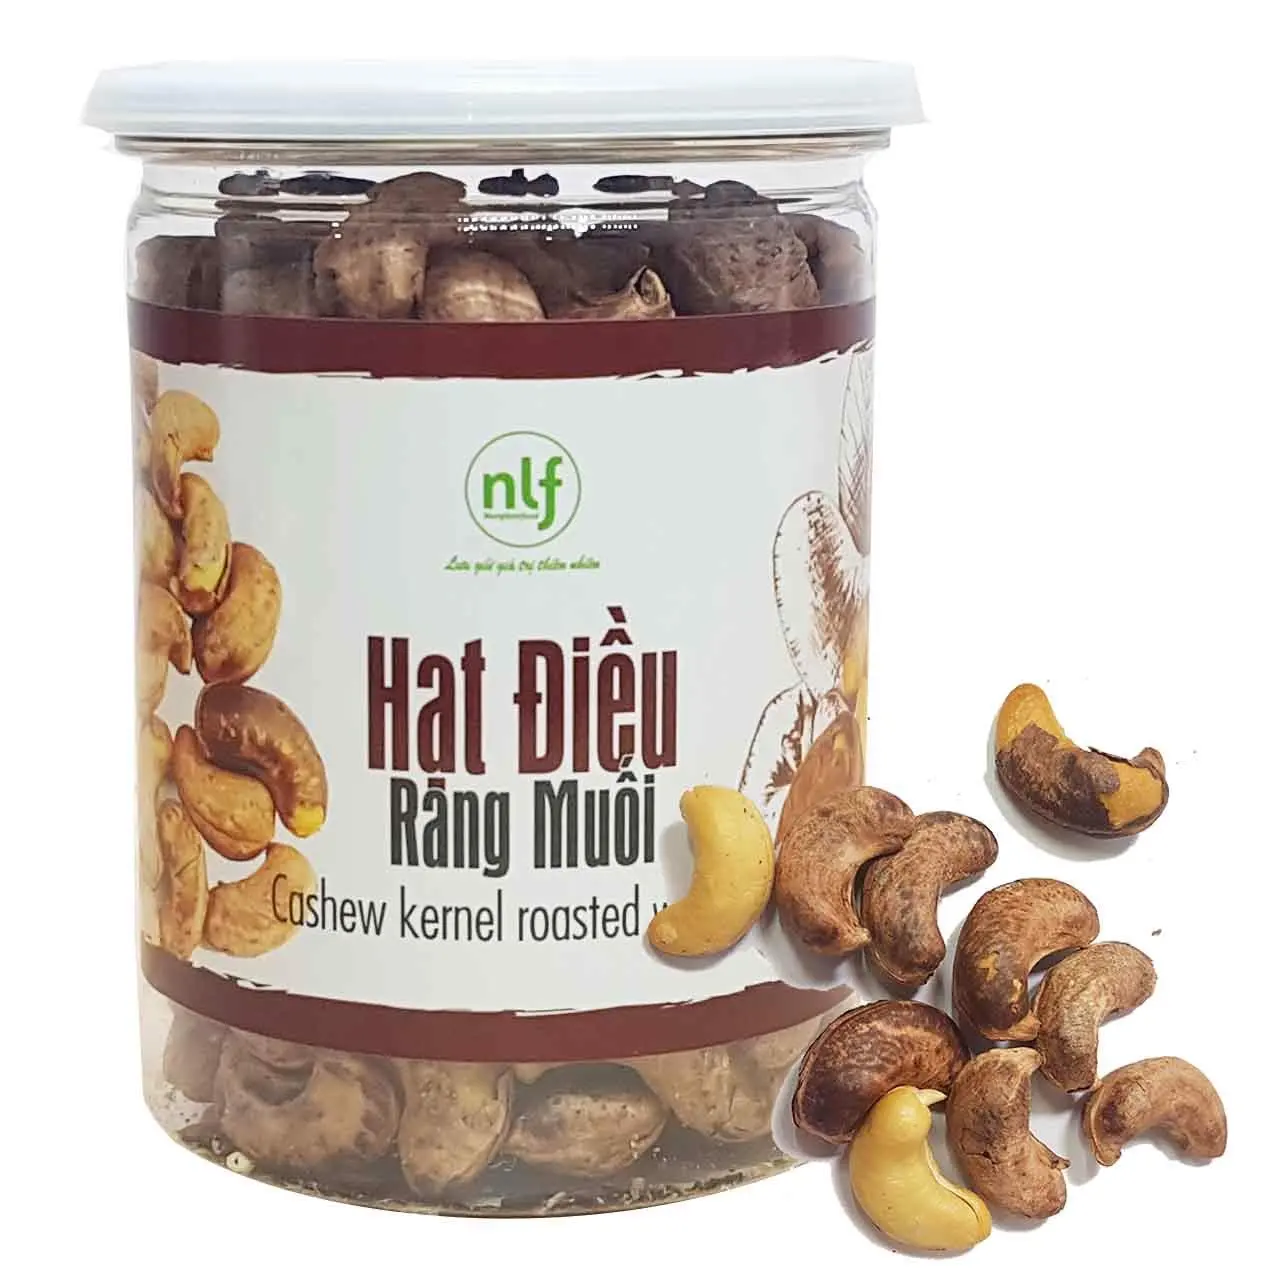 
Best price and high quality Cashew kernel roasted with salt from Megavita Vietnam 